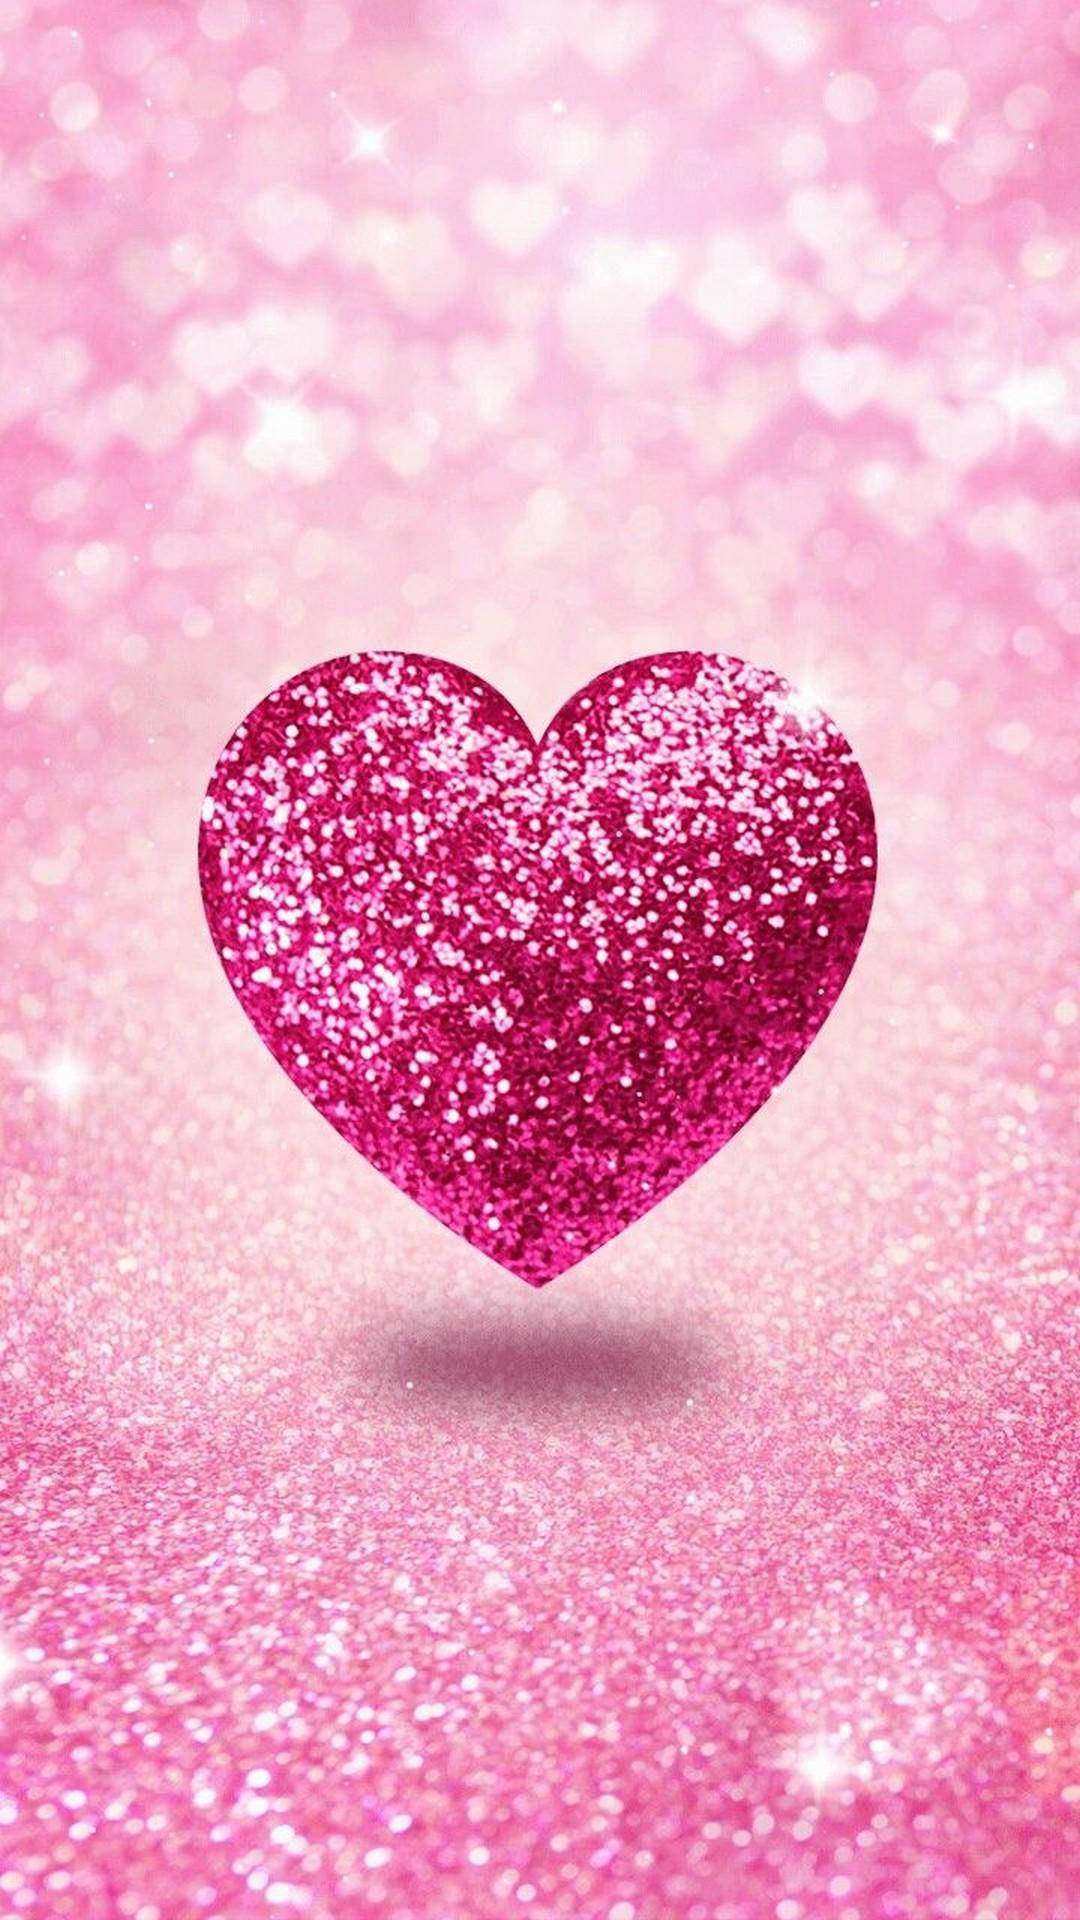 Lovely 3d Glittery Pink Heart Love Iphone Background